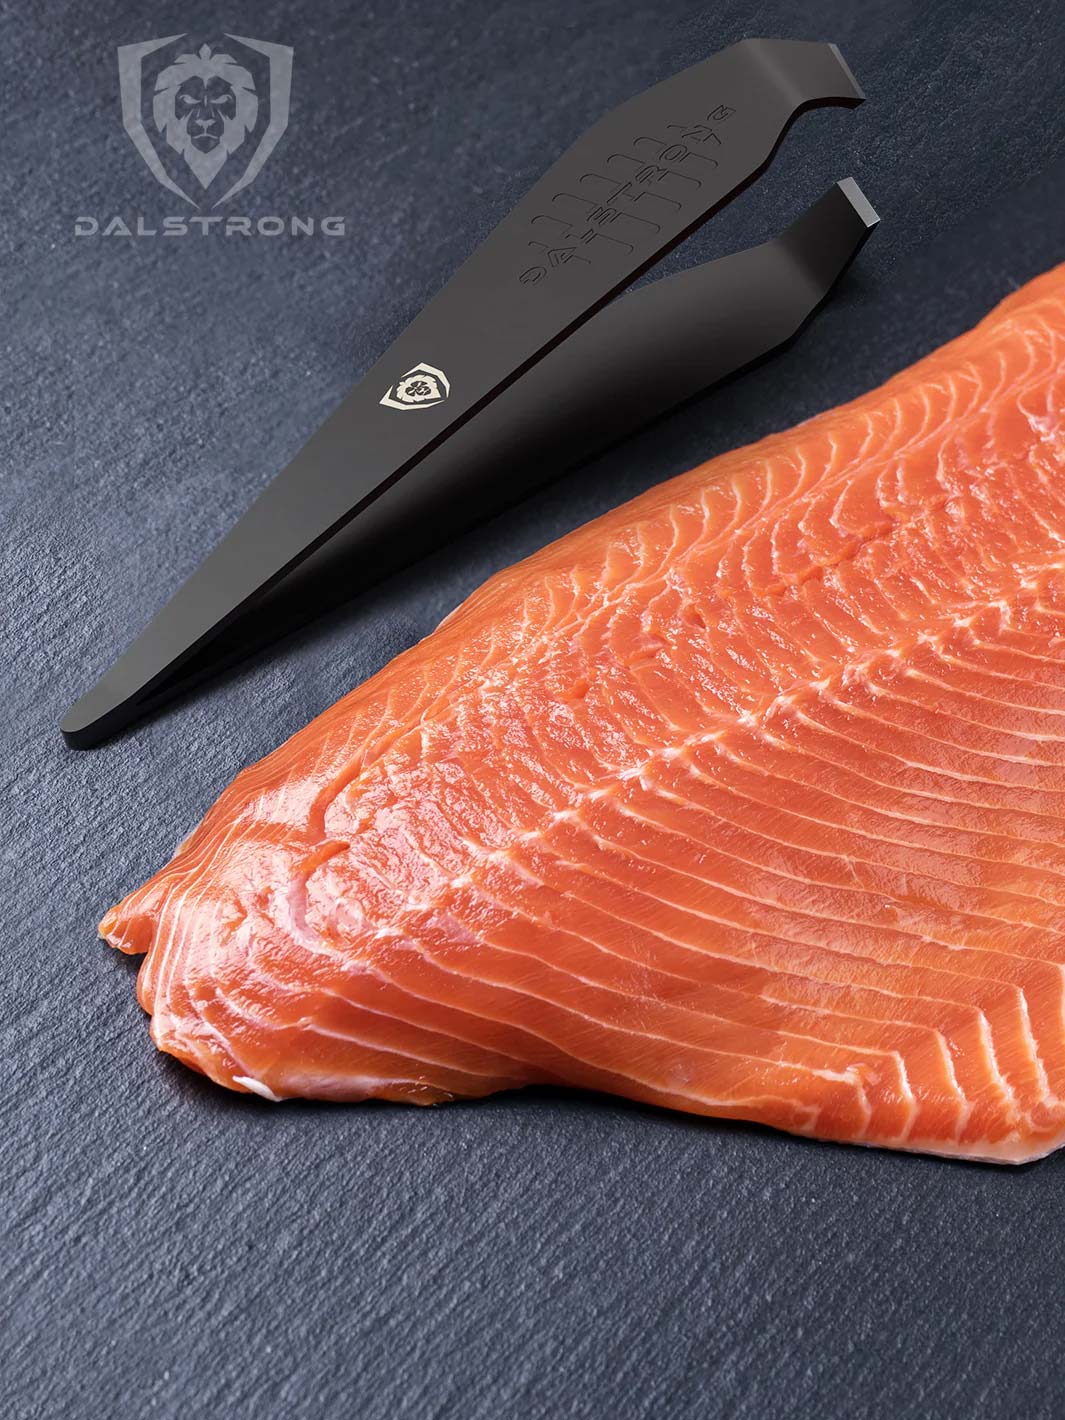 Dalstrong professional fish tweezers with black coating and a fillet of salmon beside it.